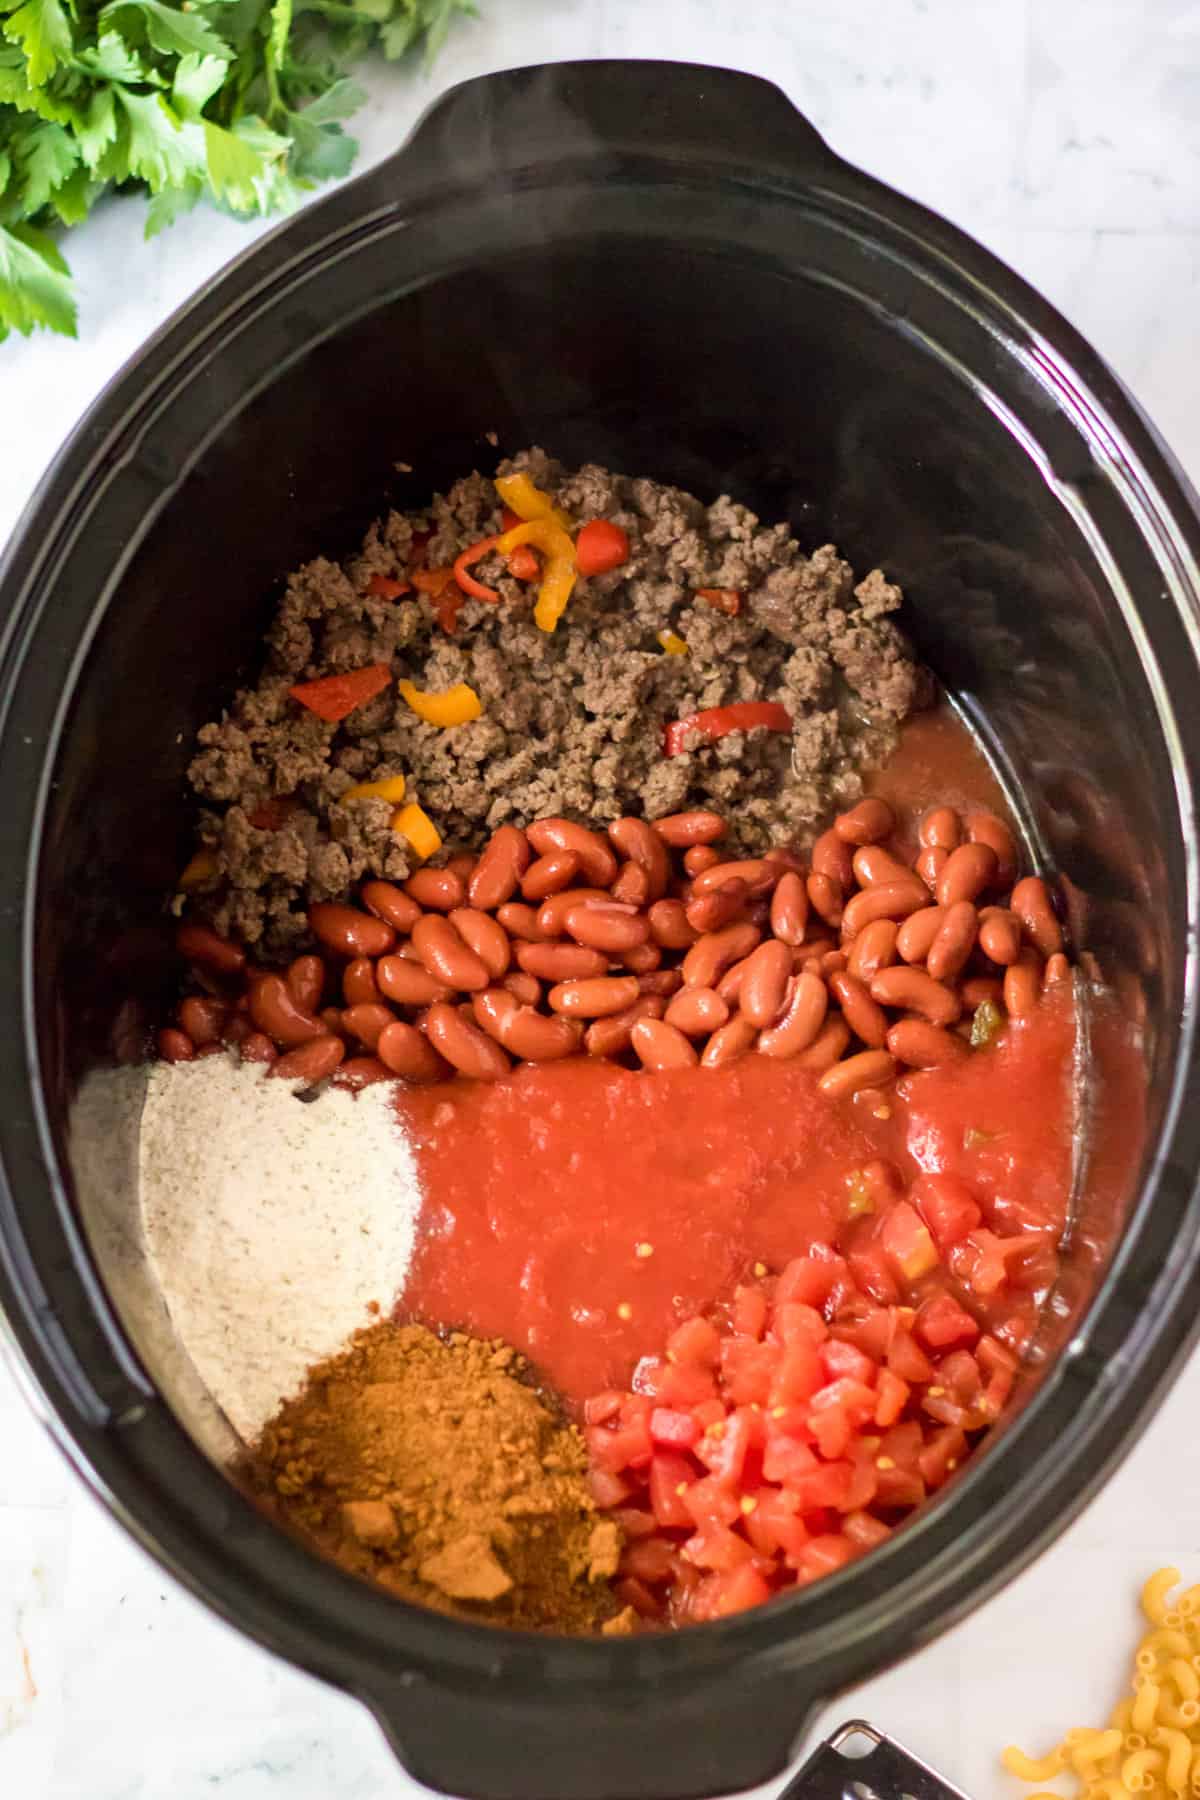 Ground beef, peppers, beans, rotel tomatoes, water, tomato sauce, and seasonings in slow cooker.